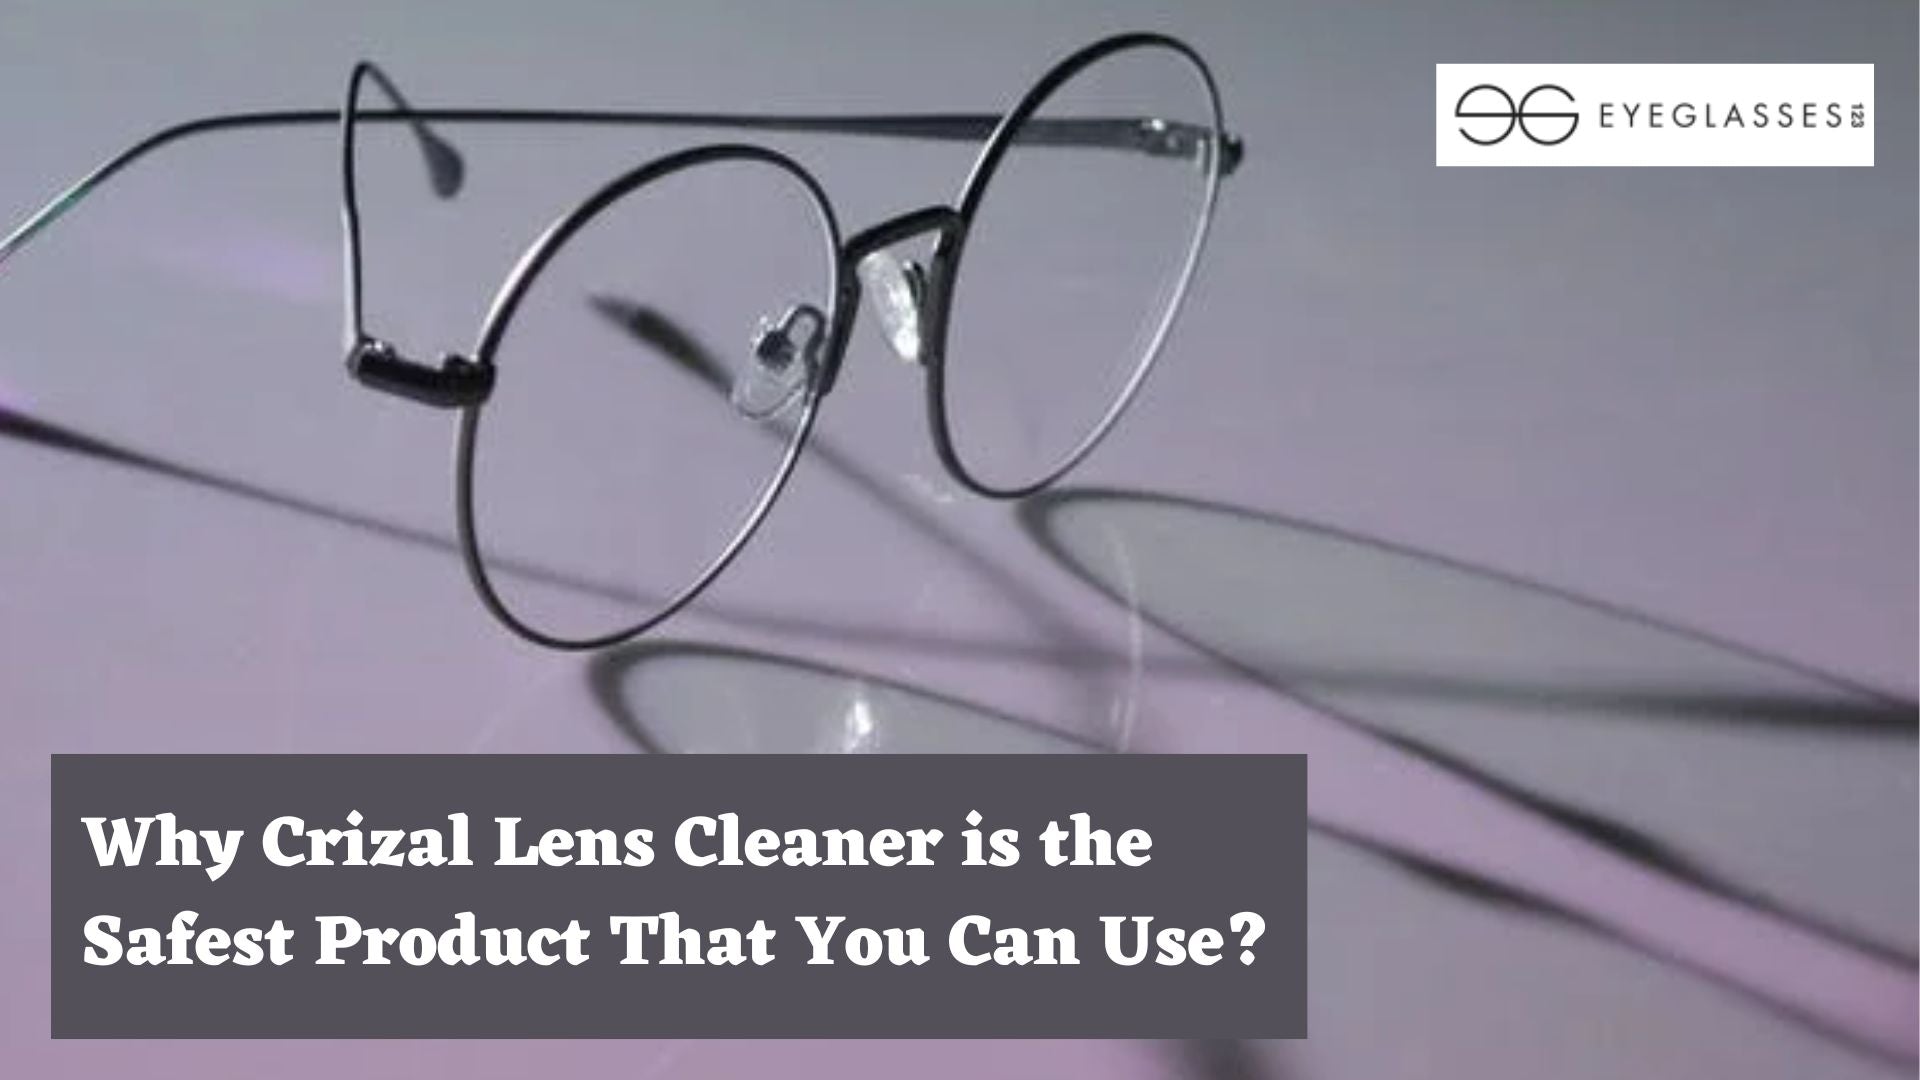 Why Crizal Lens Cleaner is the Safest Product That You Can Use?